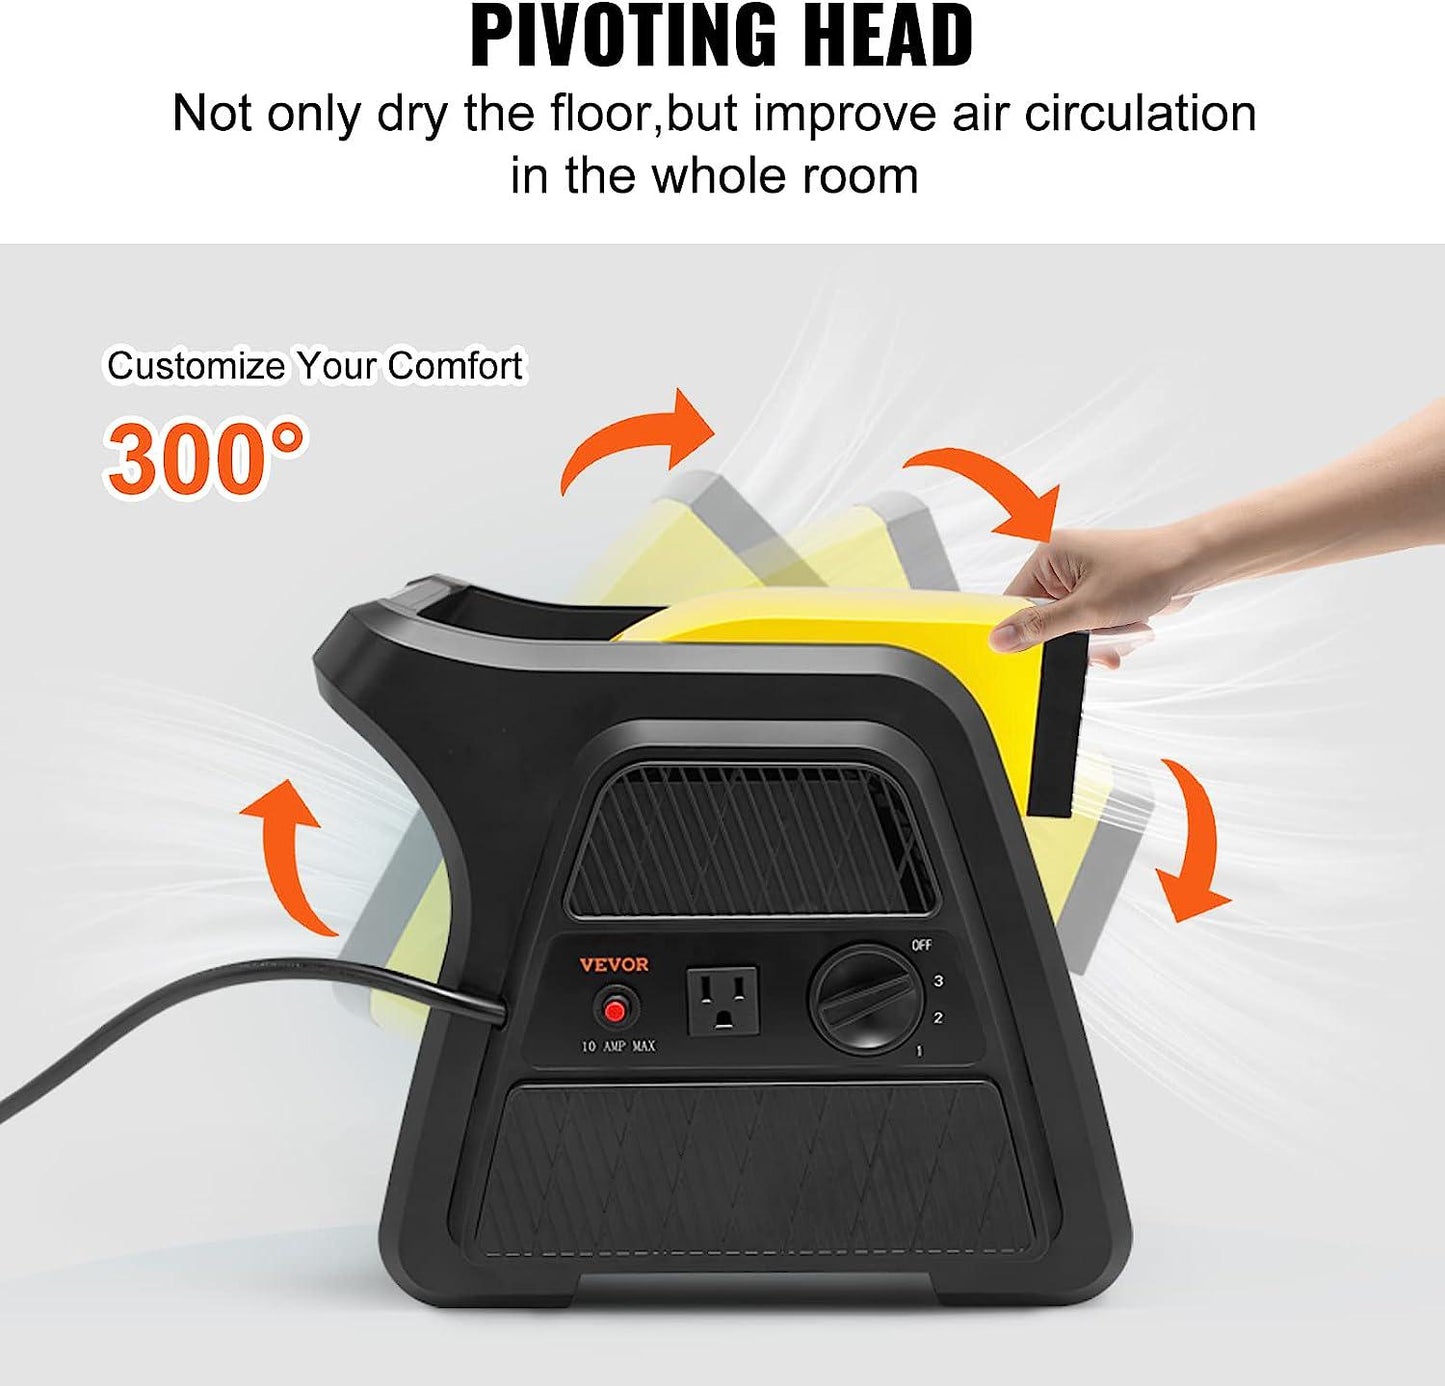 Pivoting Utility Fan, 600 CFM High Velocity Floor Blower for Drying, Cooling, Ventilating, Exhausting, 300° Blowing Angle Air Mover, Portable Carpet Dryer Fan